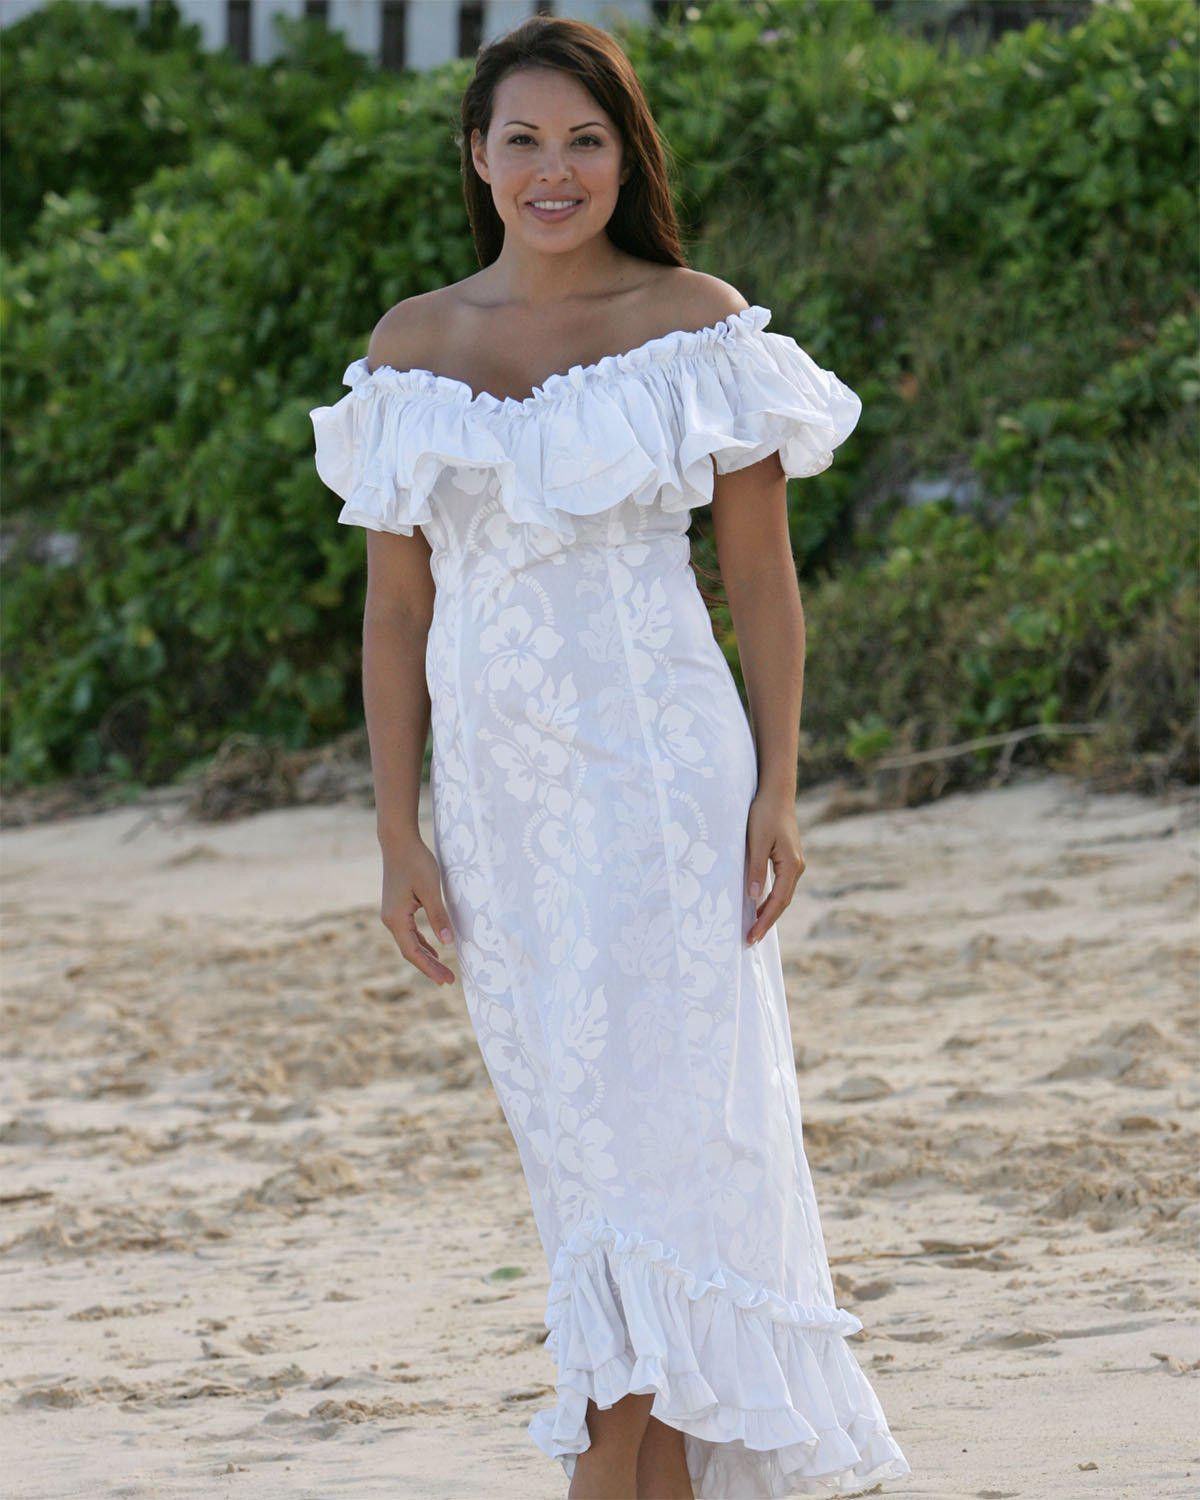 Tropical Wedding Dresses
 Plus Size Wedding Dresses How to be perfect bride